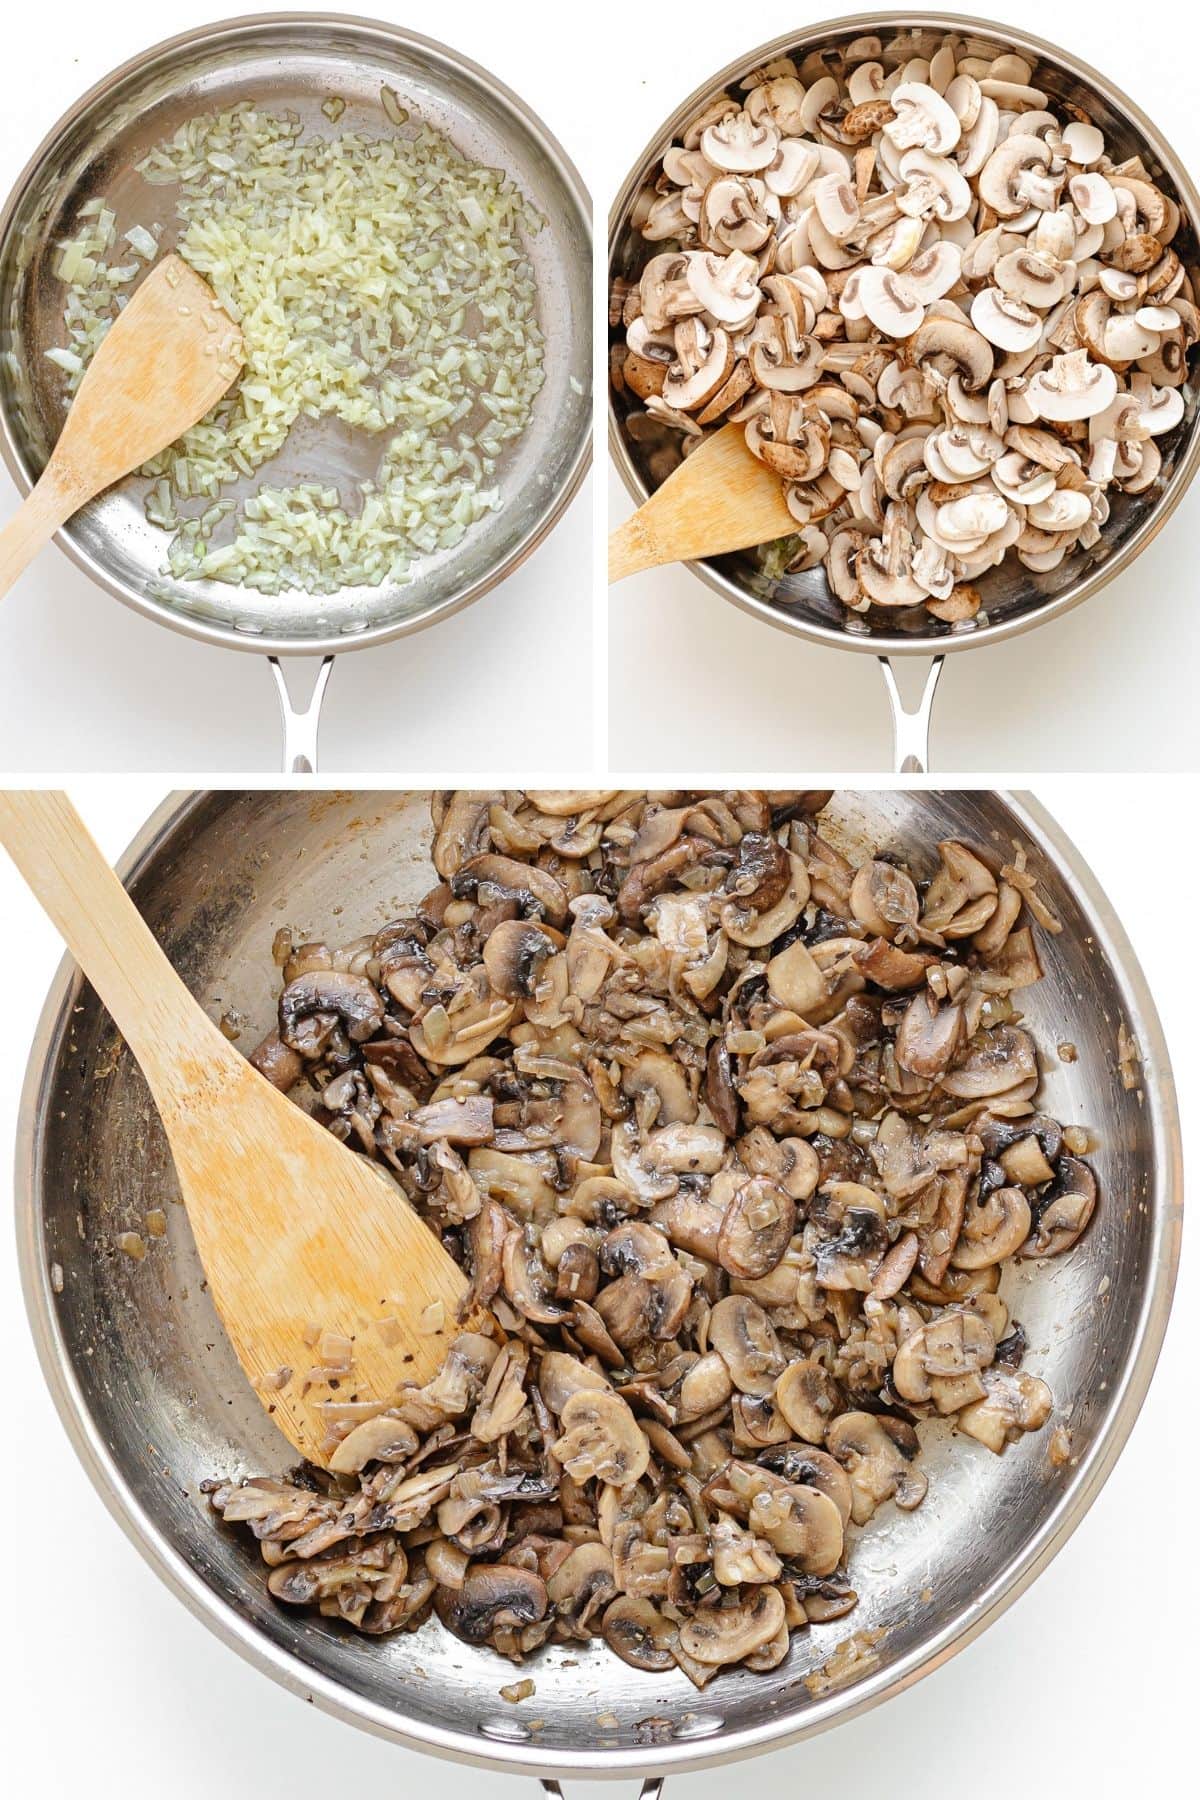 Collage of images showing different stages of the veggies being sautéed for stroganoff sauce.